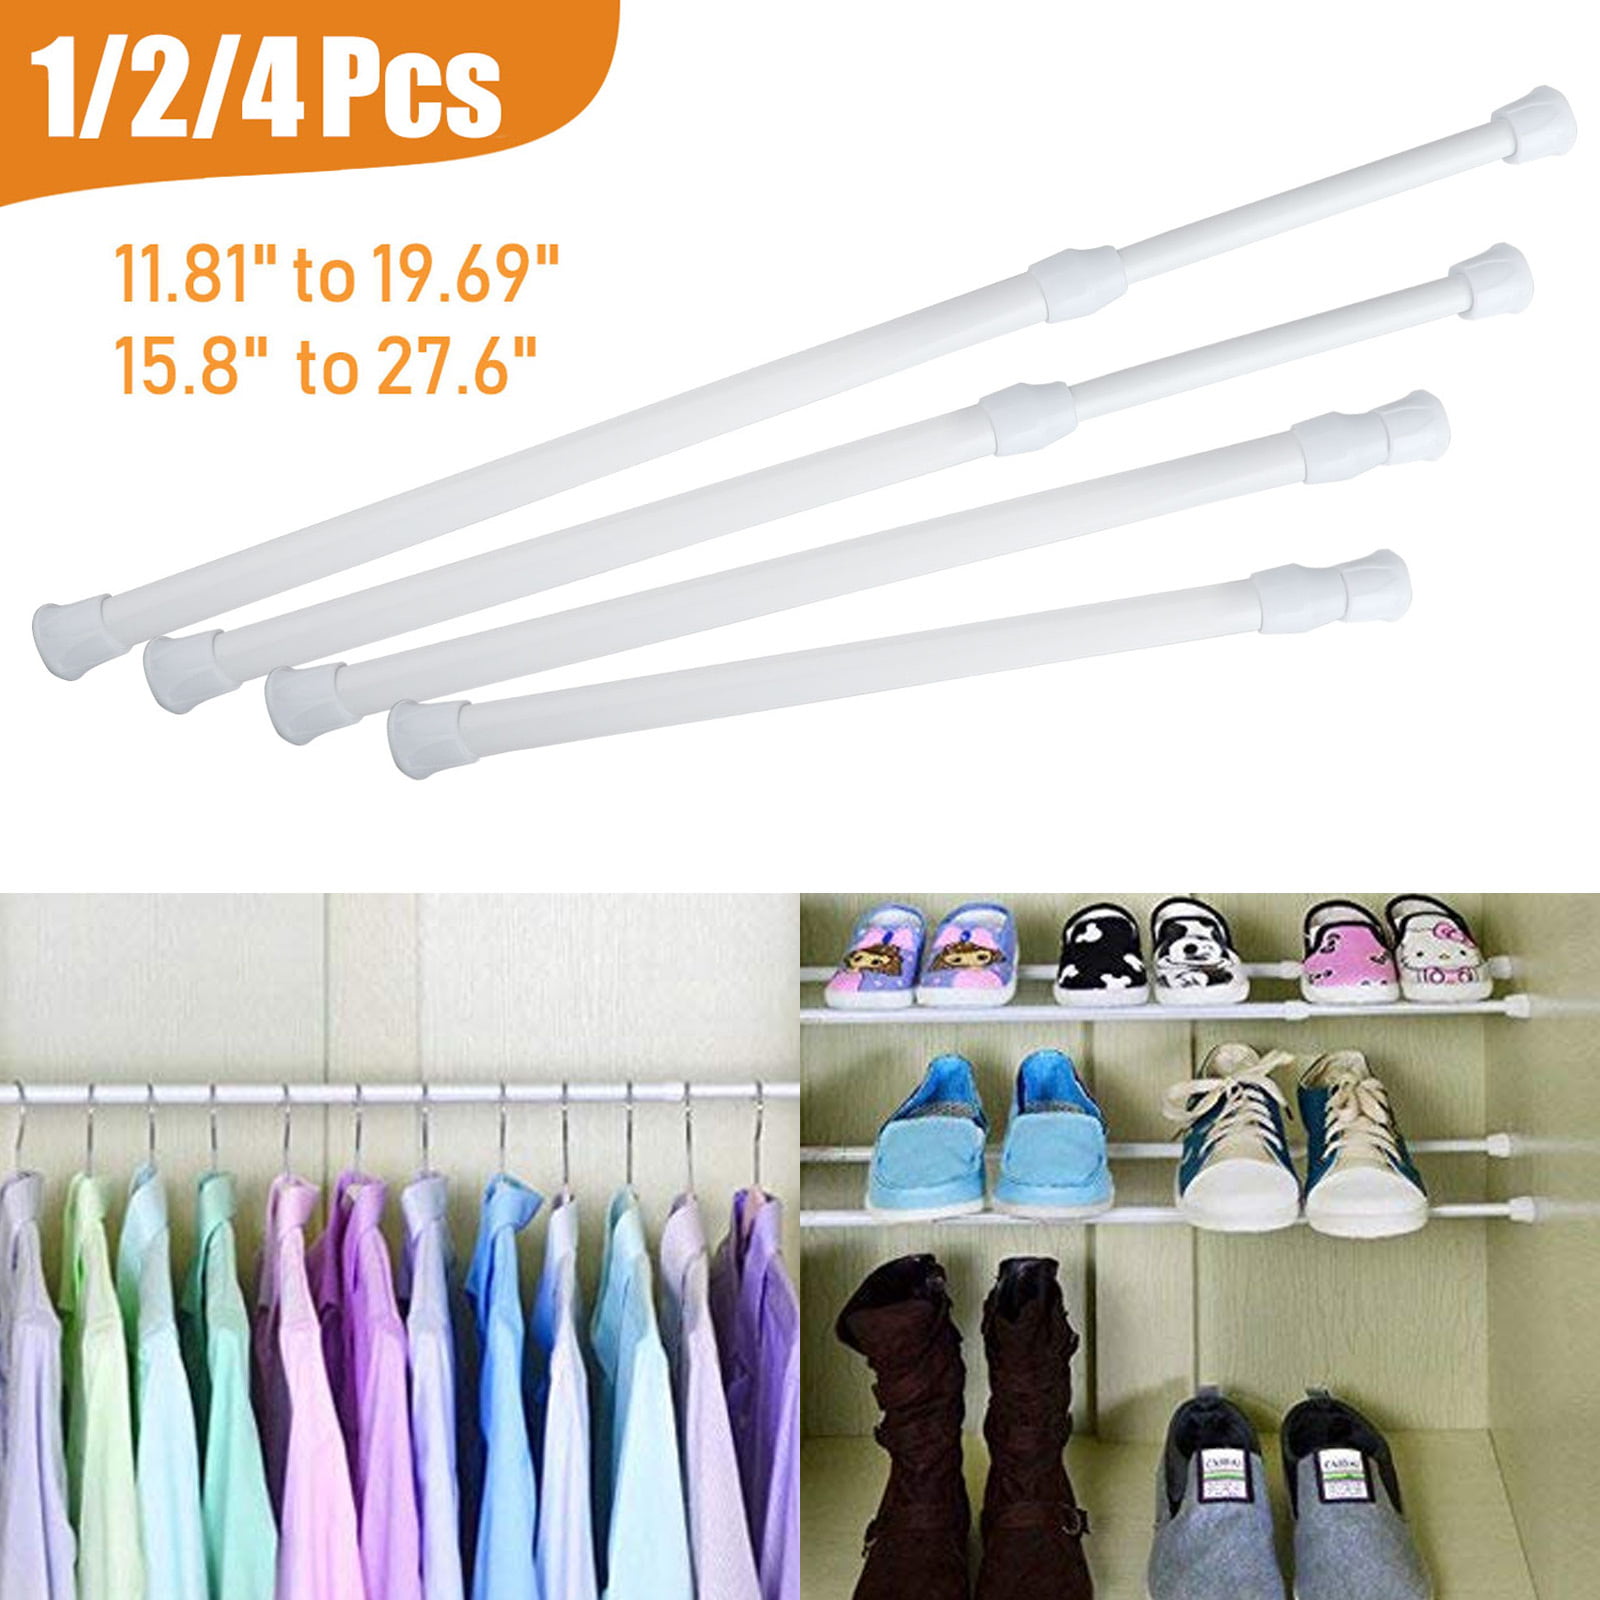 Wellgoods Combination Joinable Spring Curtain Tension Rods Adjustable Extension Rod for Cupboard Bathroom Window Closet 29.5-42 inches 1 Pack